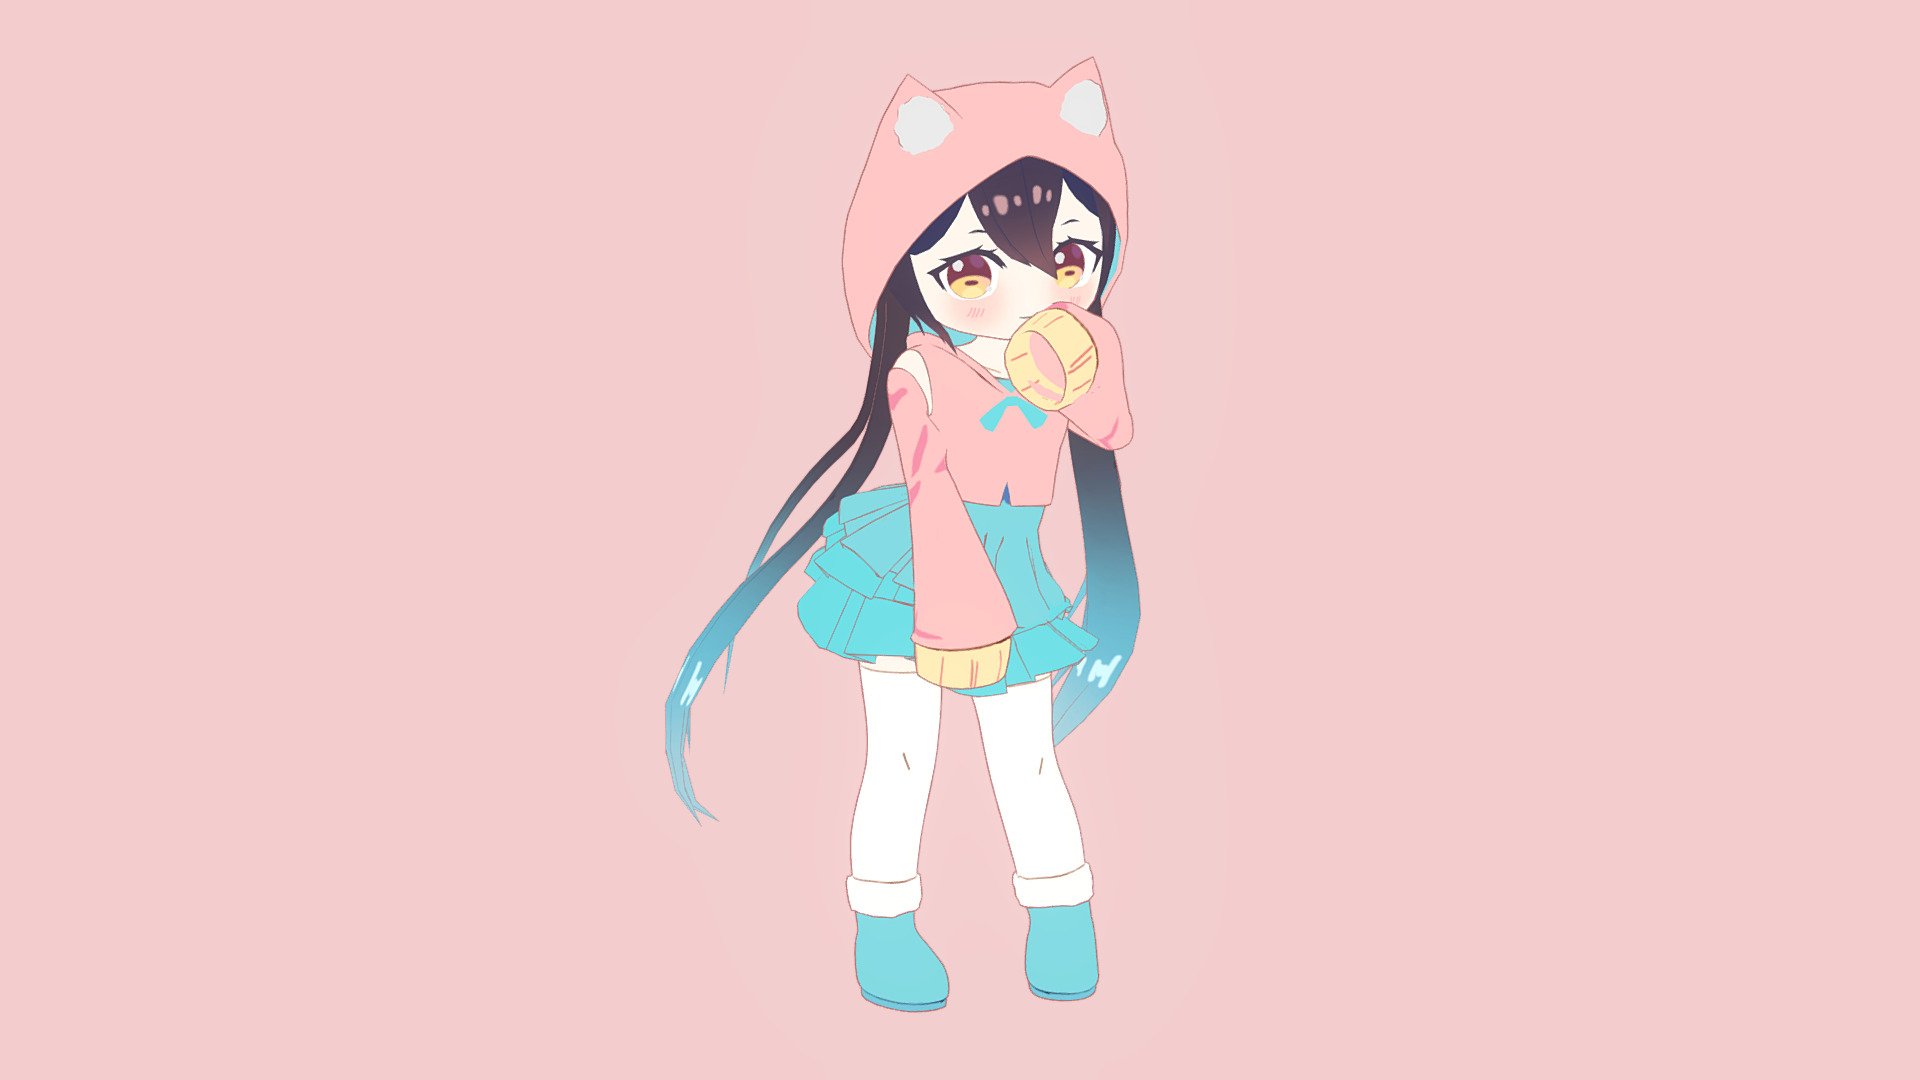 Practicing making chibi models based on 2D drawings. The character is fully textured and rigged so you can probably use it for games or animation. Credit to Hyanna Natsu for the reference drawing, link to their works below.
https://www.deviantart.com/hyanna-natsu/art/Video-Commission-Comfy-Neko-812782730 - Chibi catgirl - Download Free 3D model by DarienToad 3d model